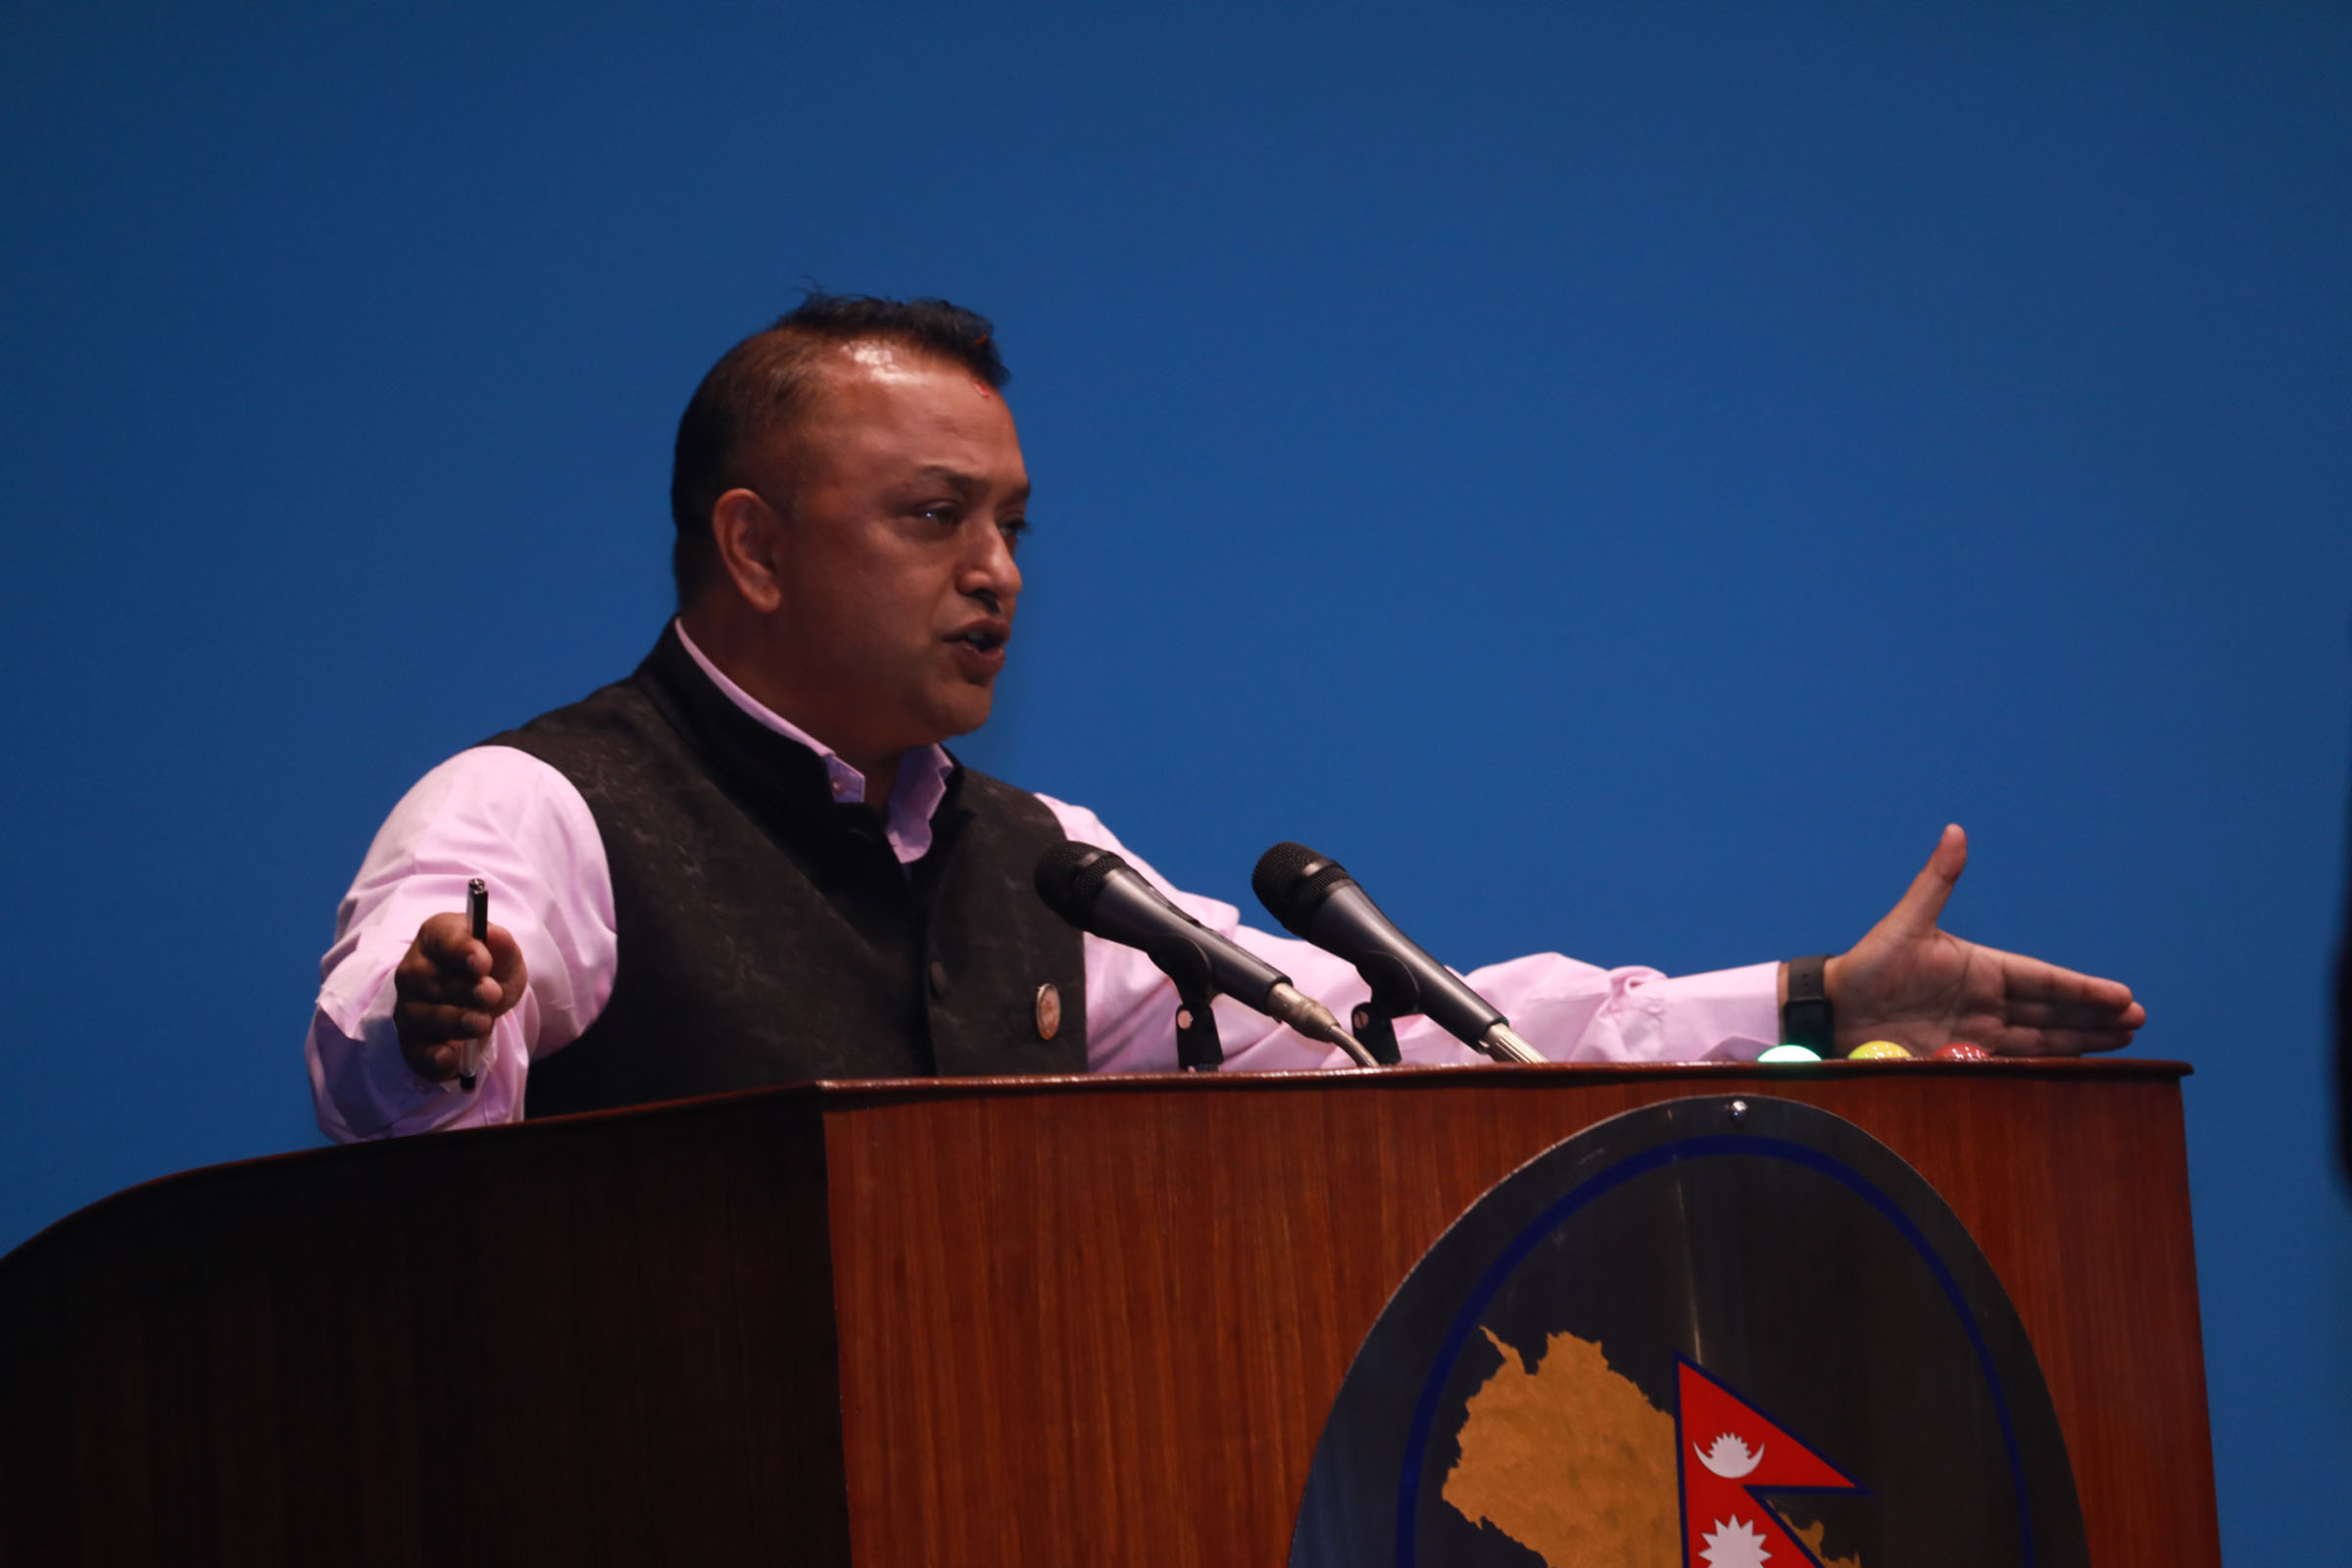 Lawmaker Thapa urges govt to address issues of small farmers